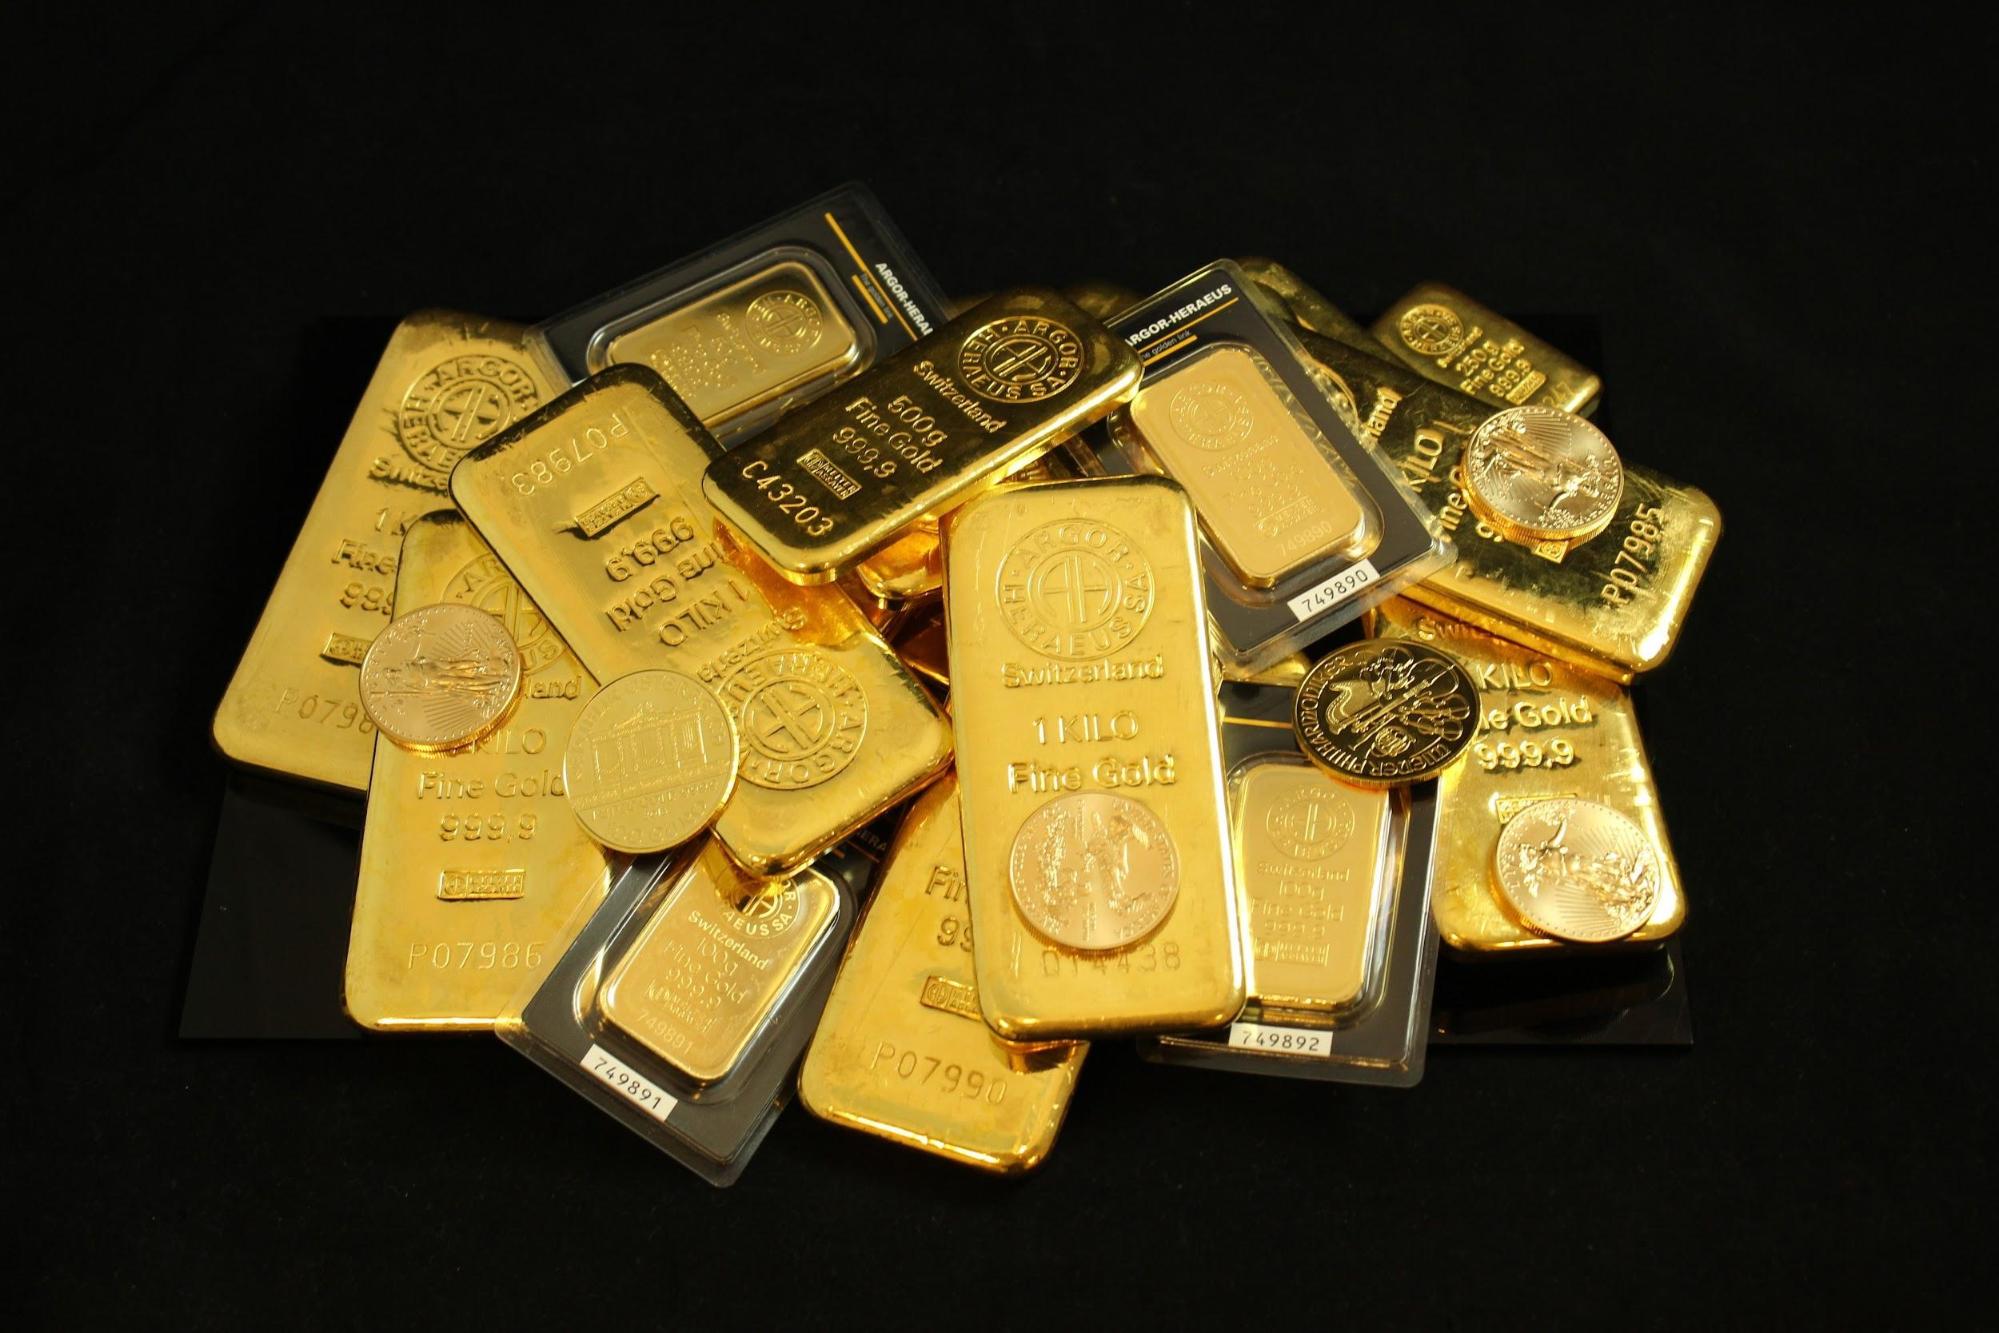 Gold Vs. Silver: Which Is The Better Investment?